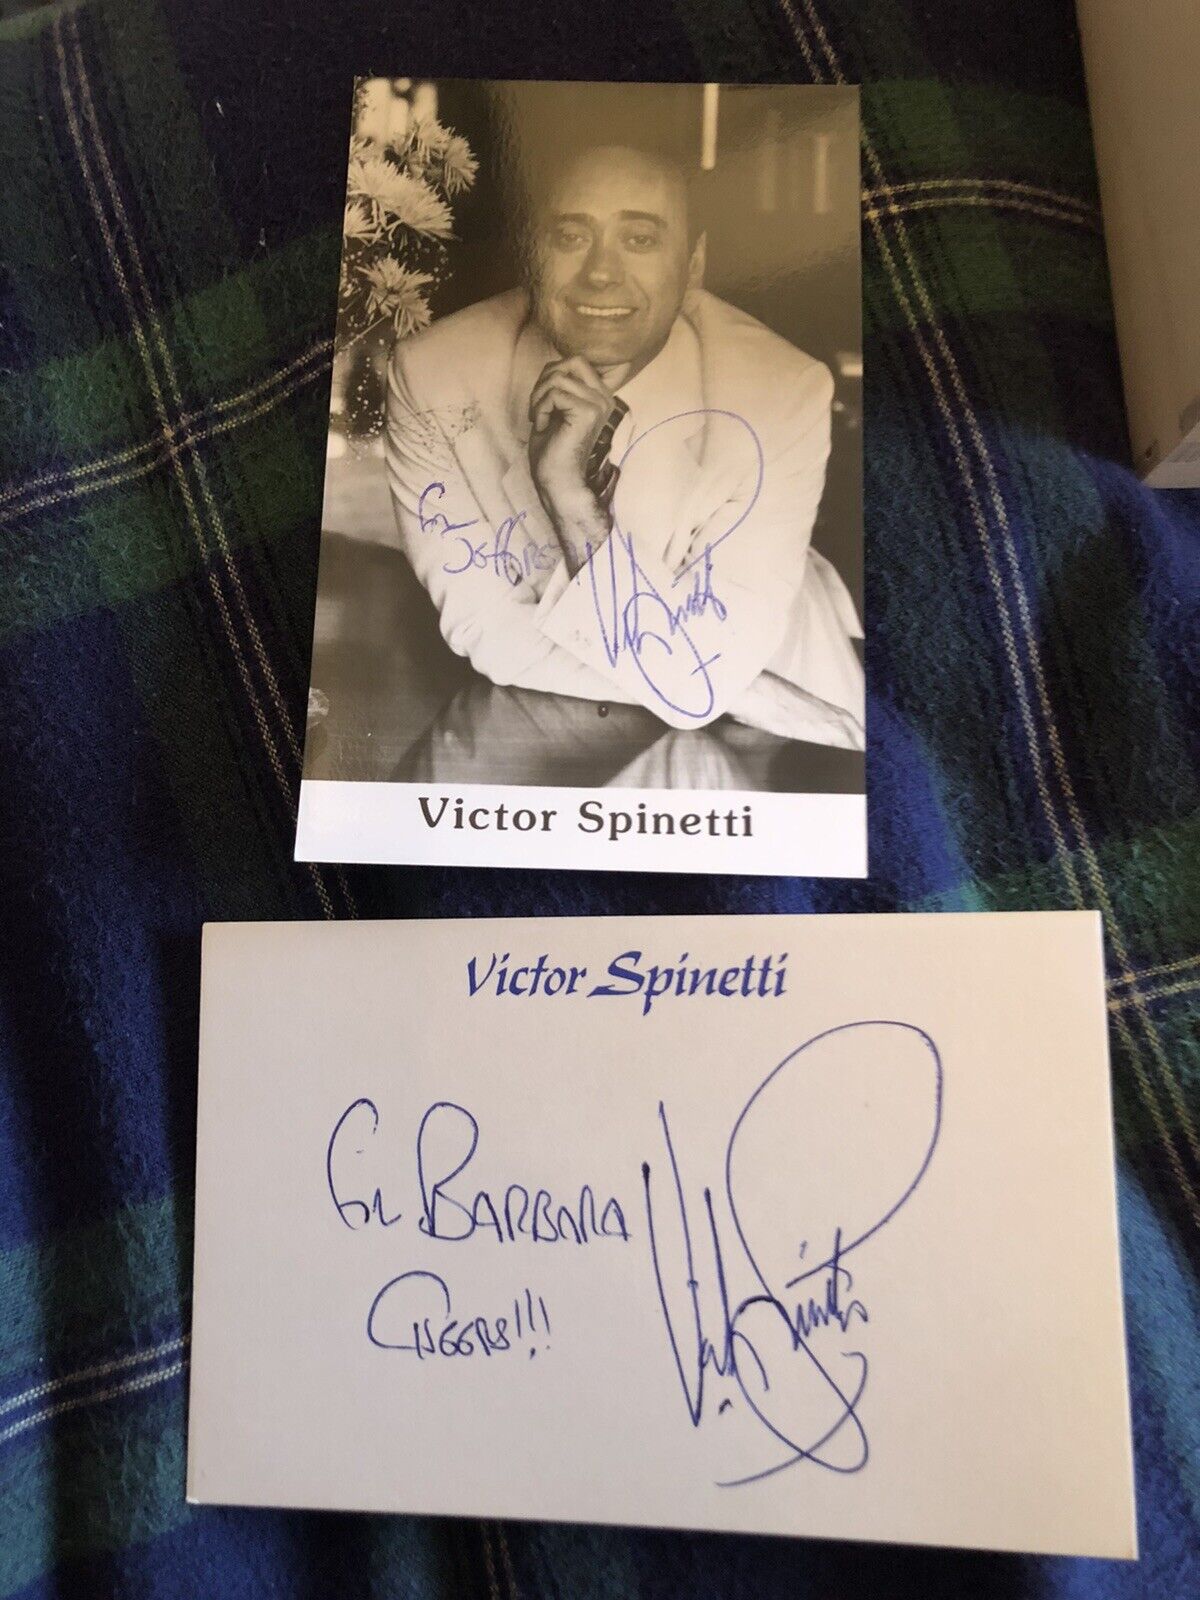 VICTOR SPINETTI (ACTOR) VINTAGE SIGNED Photo Poster painting & SIGNED CARD